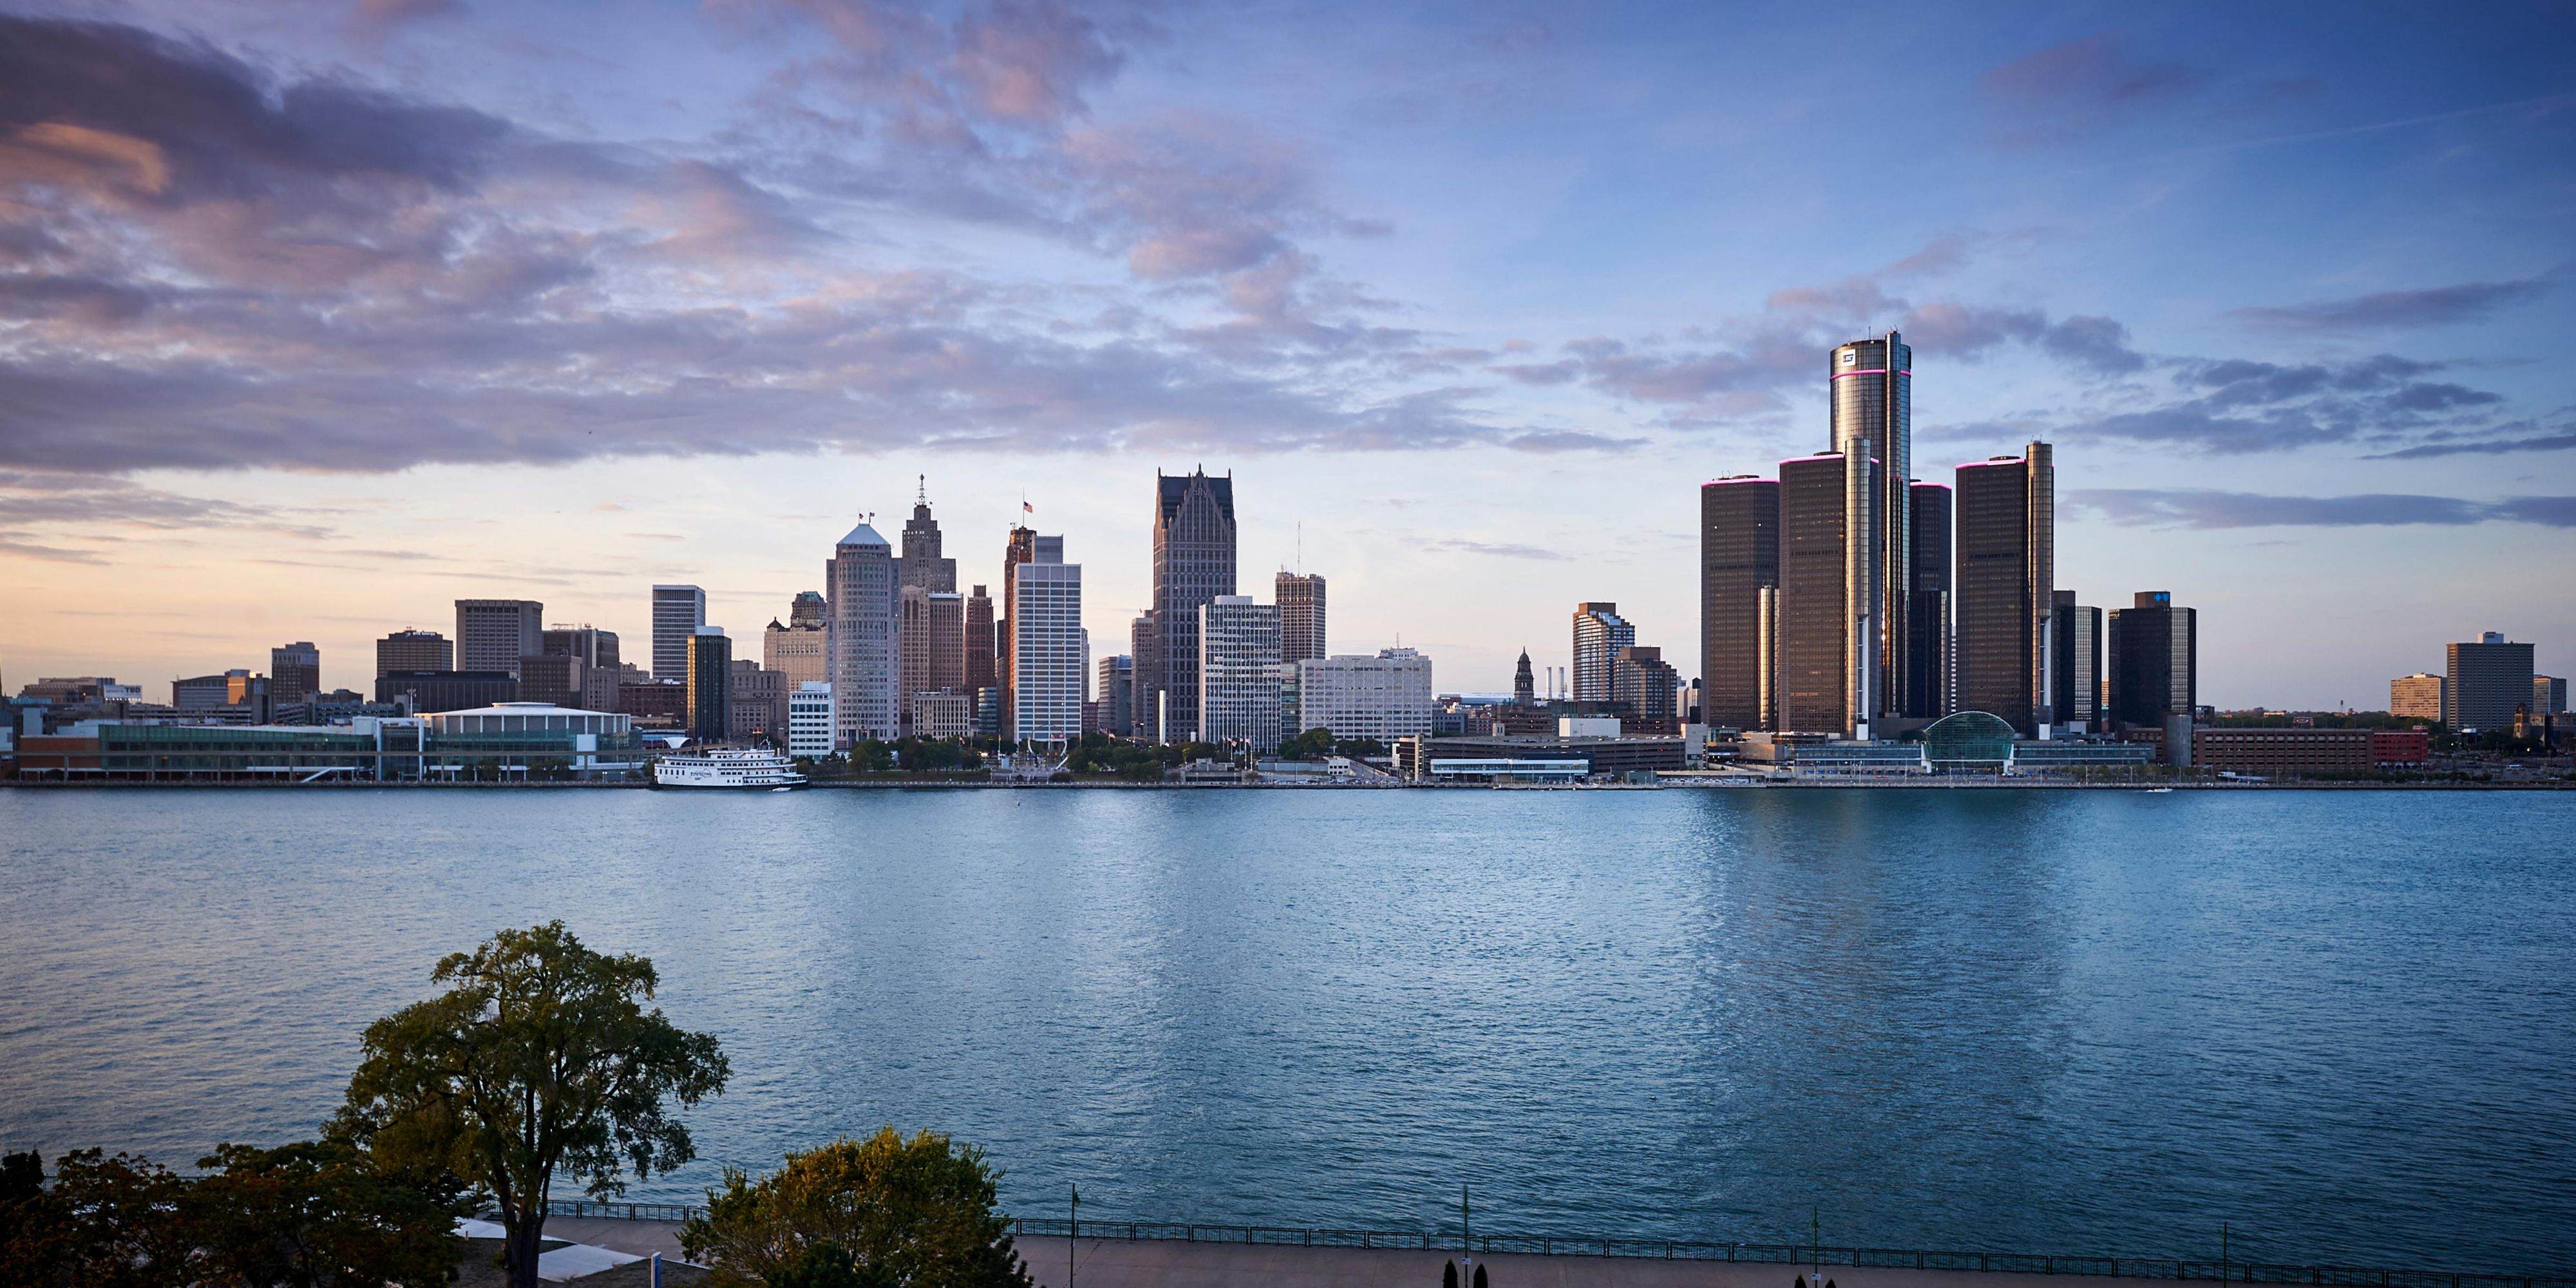 The hotel is situated on the Detroit River where guests can overlook the river and the Detroit City skyline. The views can be enjoyed while eating your morning Express Start Breakfast in one of our waterfront guest rooms.